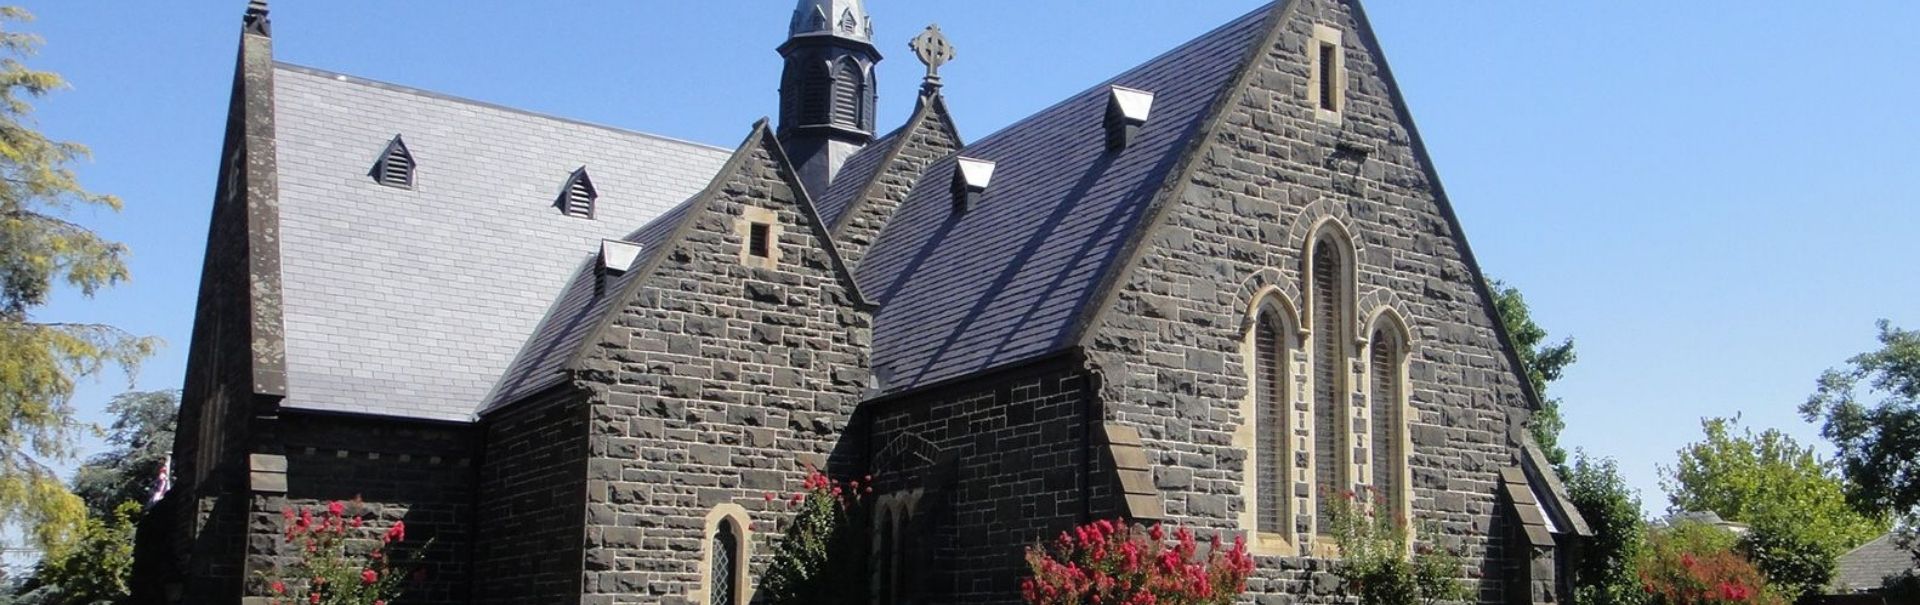 Exterior of St George's Anglican Church